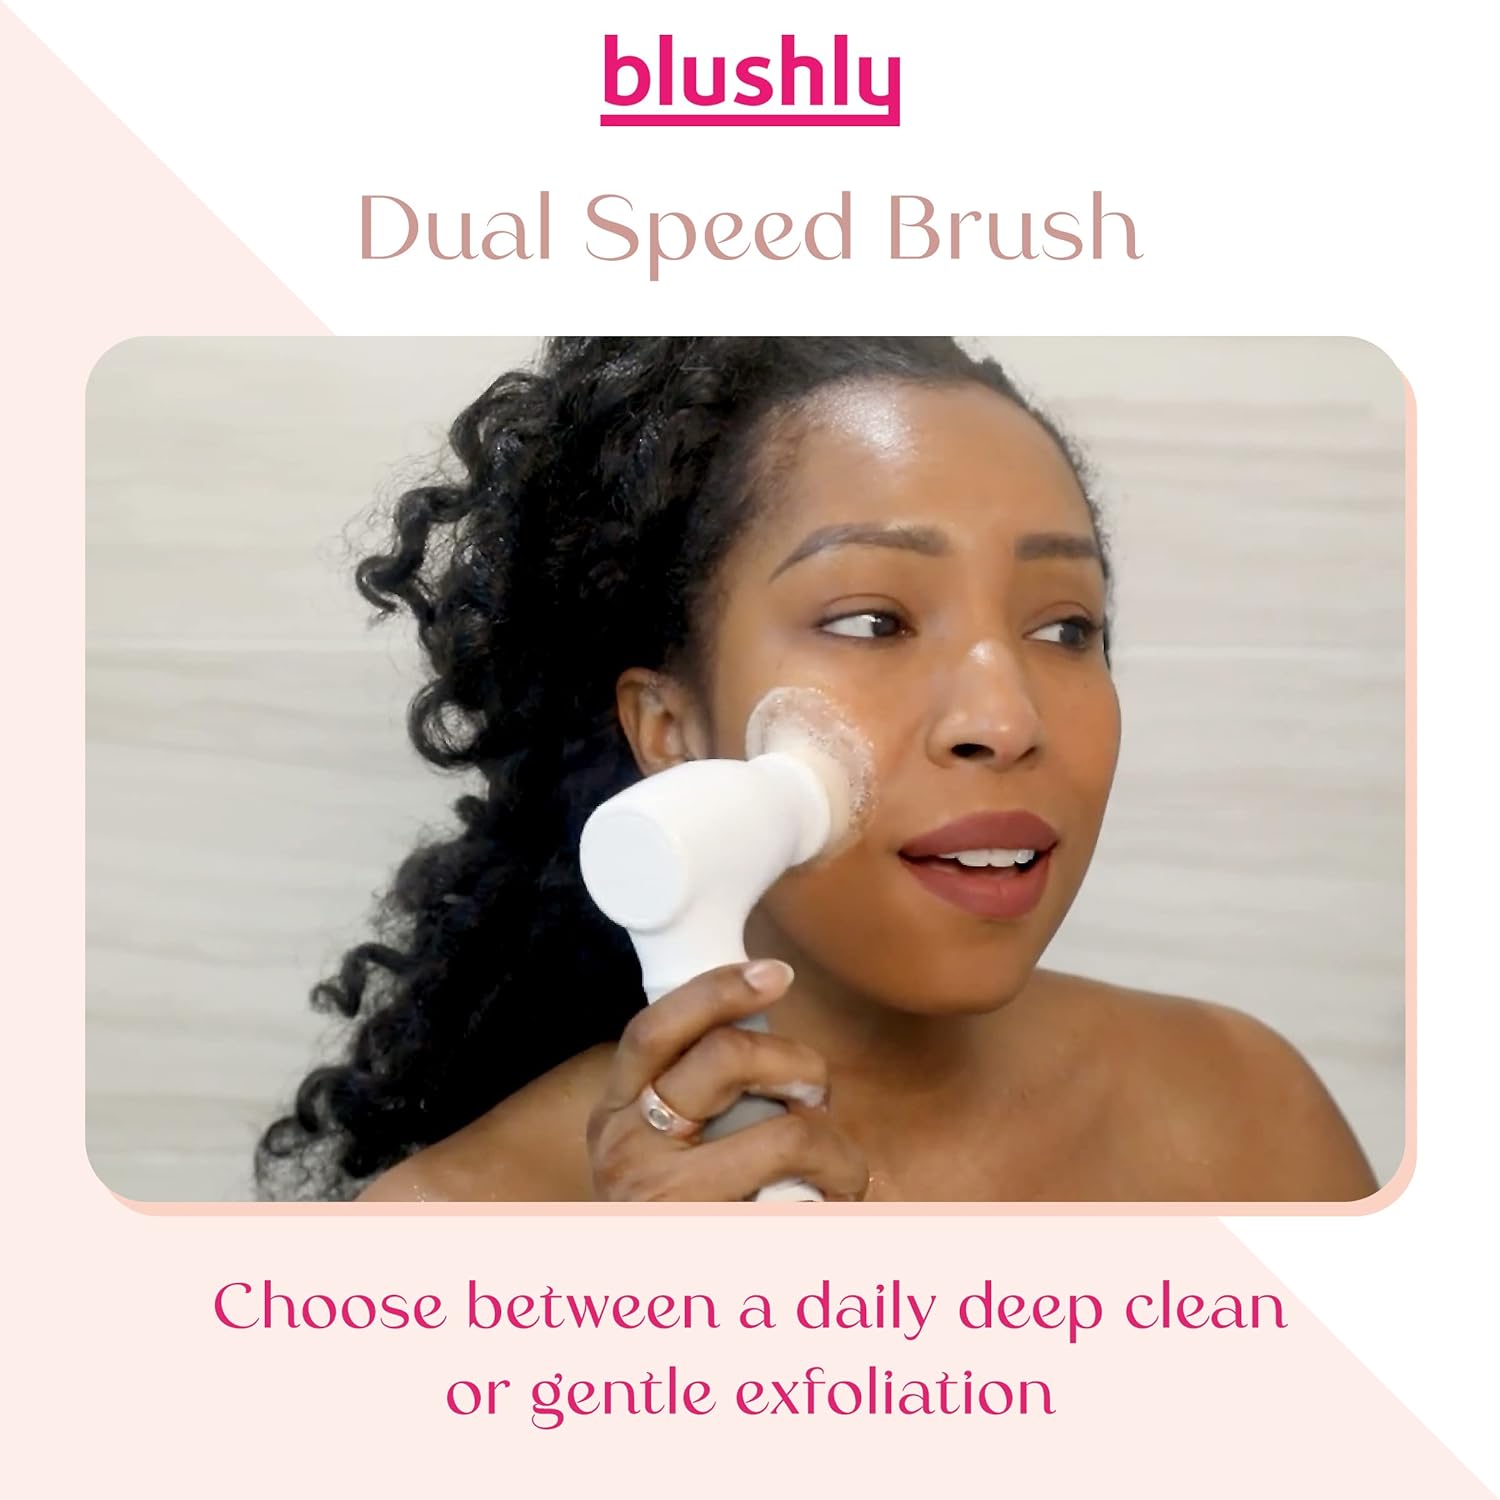 Blushly Facial Cleansing Brush - 360 Degree Facial Brush - Facial Brushes for Cleaning and Exfoliating - Face Cleansing Brush for Skin Care Routine - Facial Brush Skin Cleansing